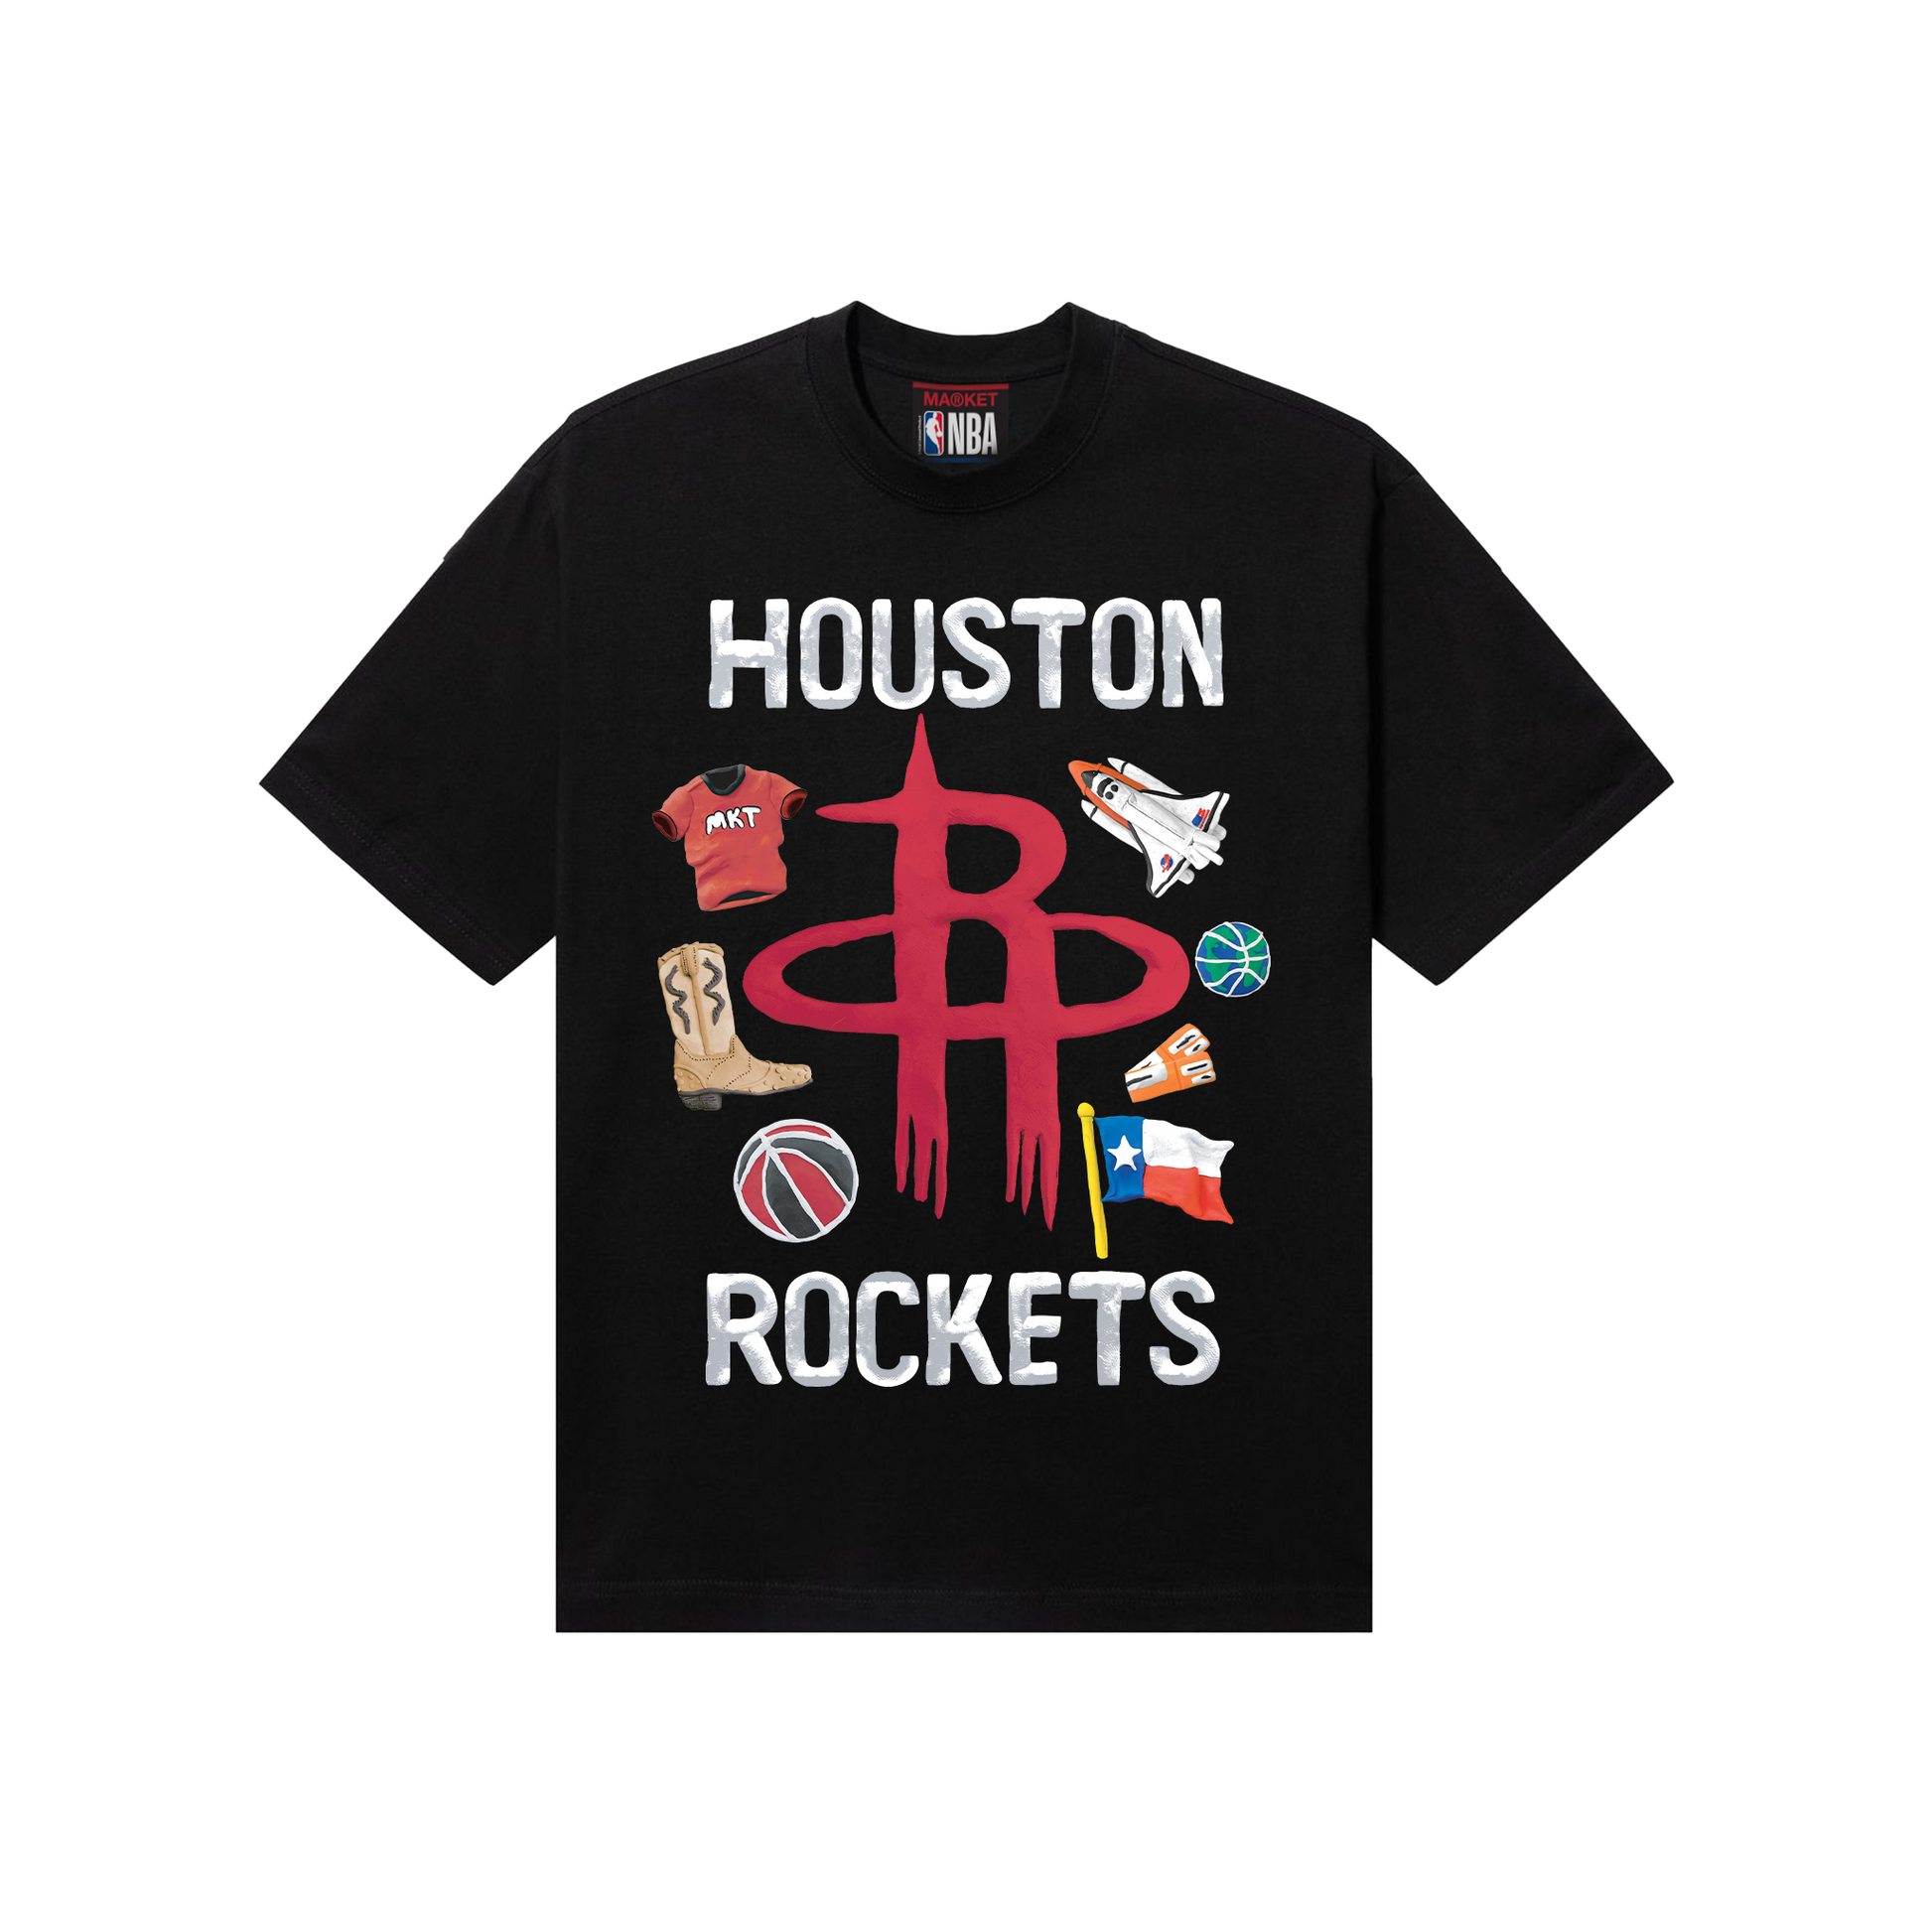 PURCHASE THE MARKET ROCKETS T-SHIRT ONLINE